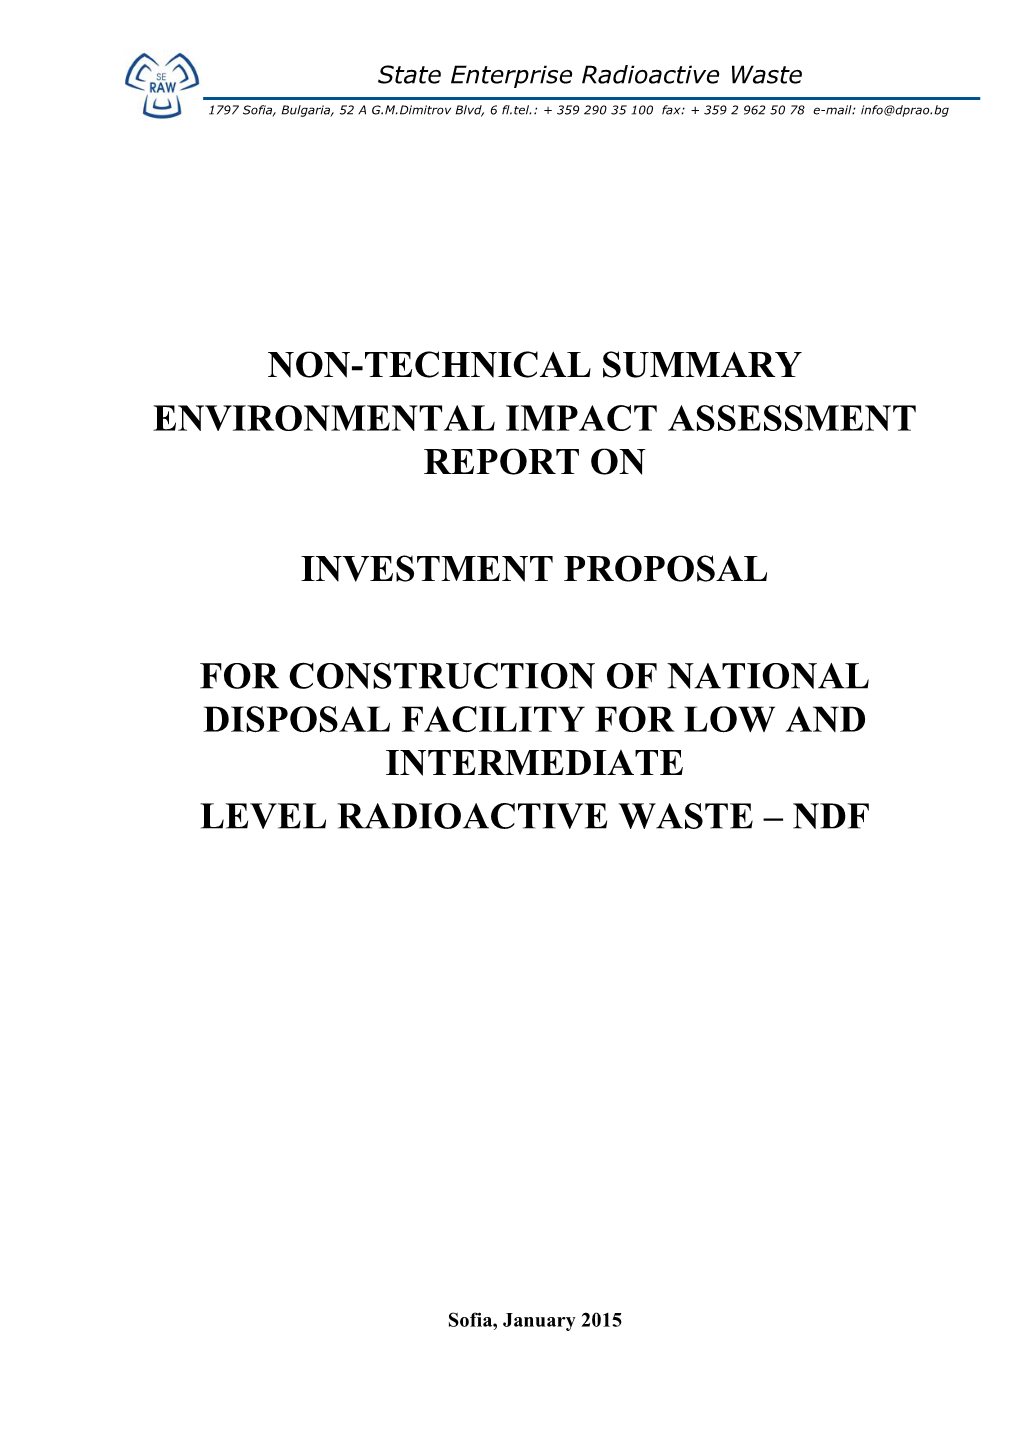 Non-Technical Summary Environmental Impact Assessment Report On